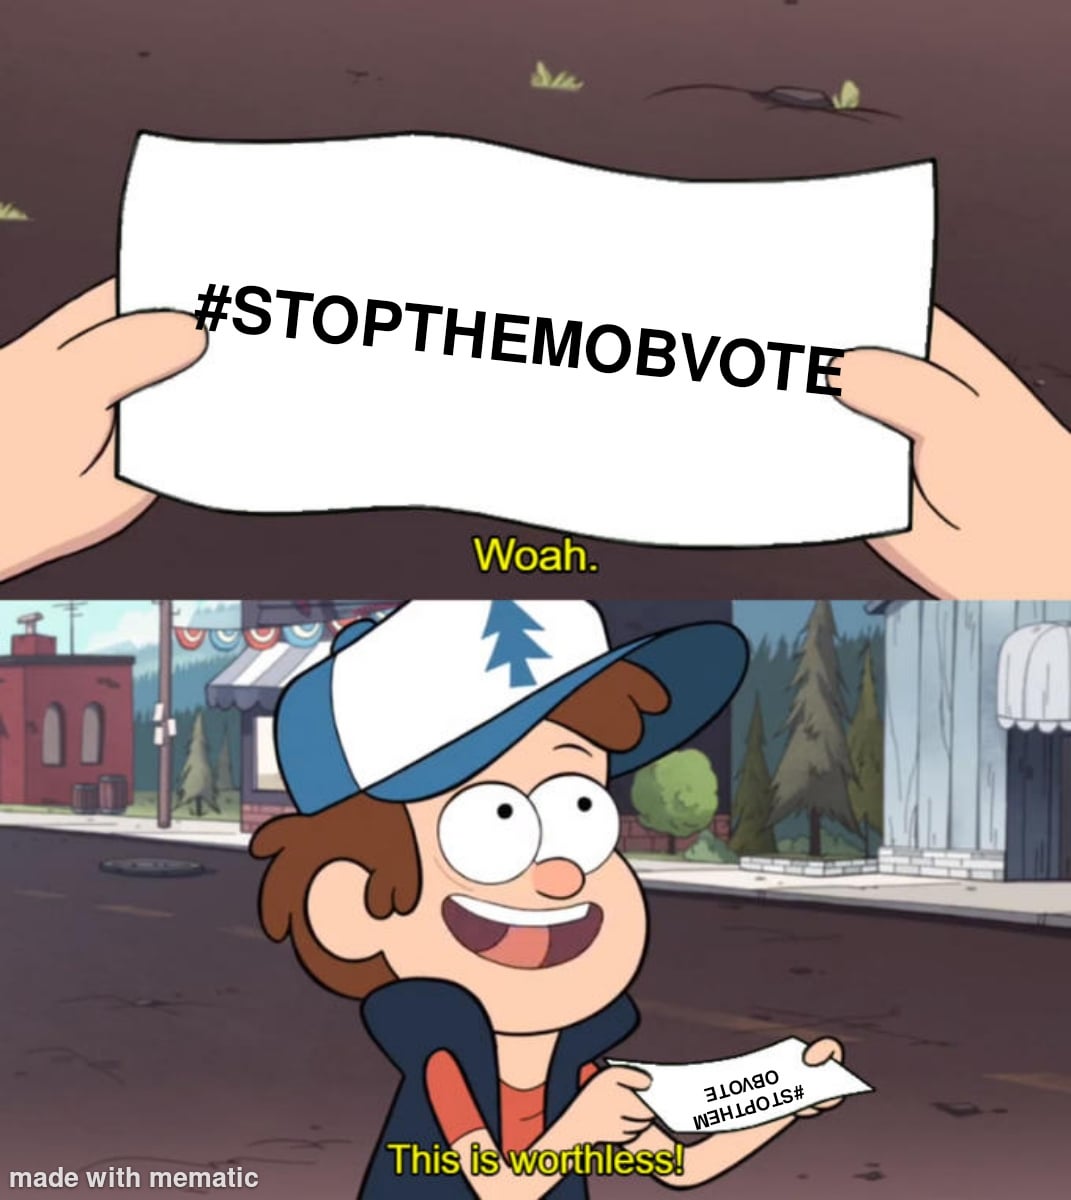 Minecraft Memes - WE GET IT WE DON'T WANT THE MOB VOTE